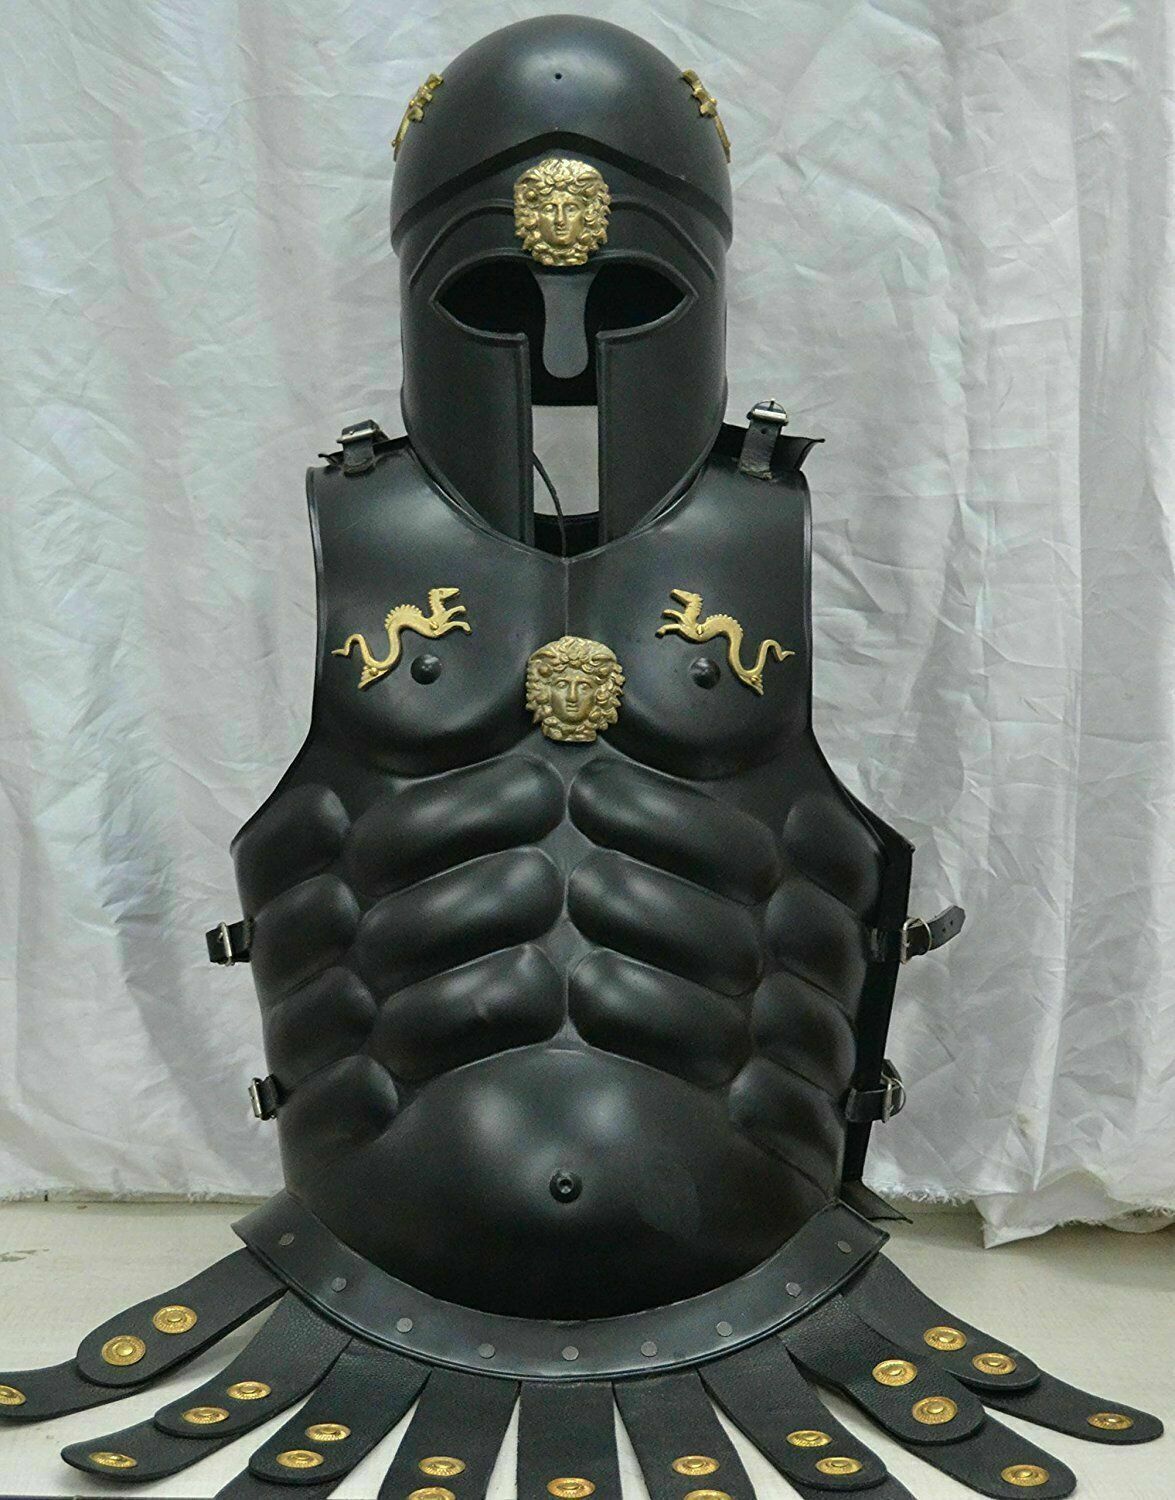 MUSCLE ARMOUR CUIRASS JACKET & TROY HELMET medieval knight armor costume STYLE